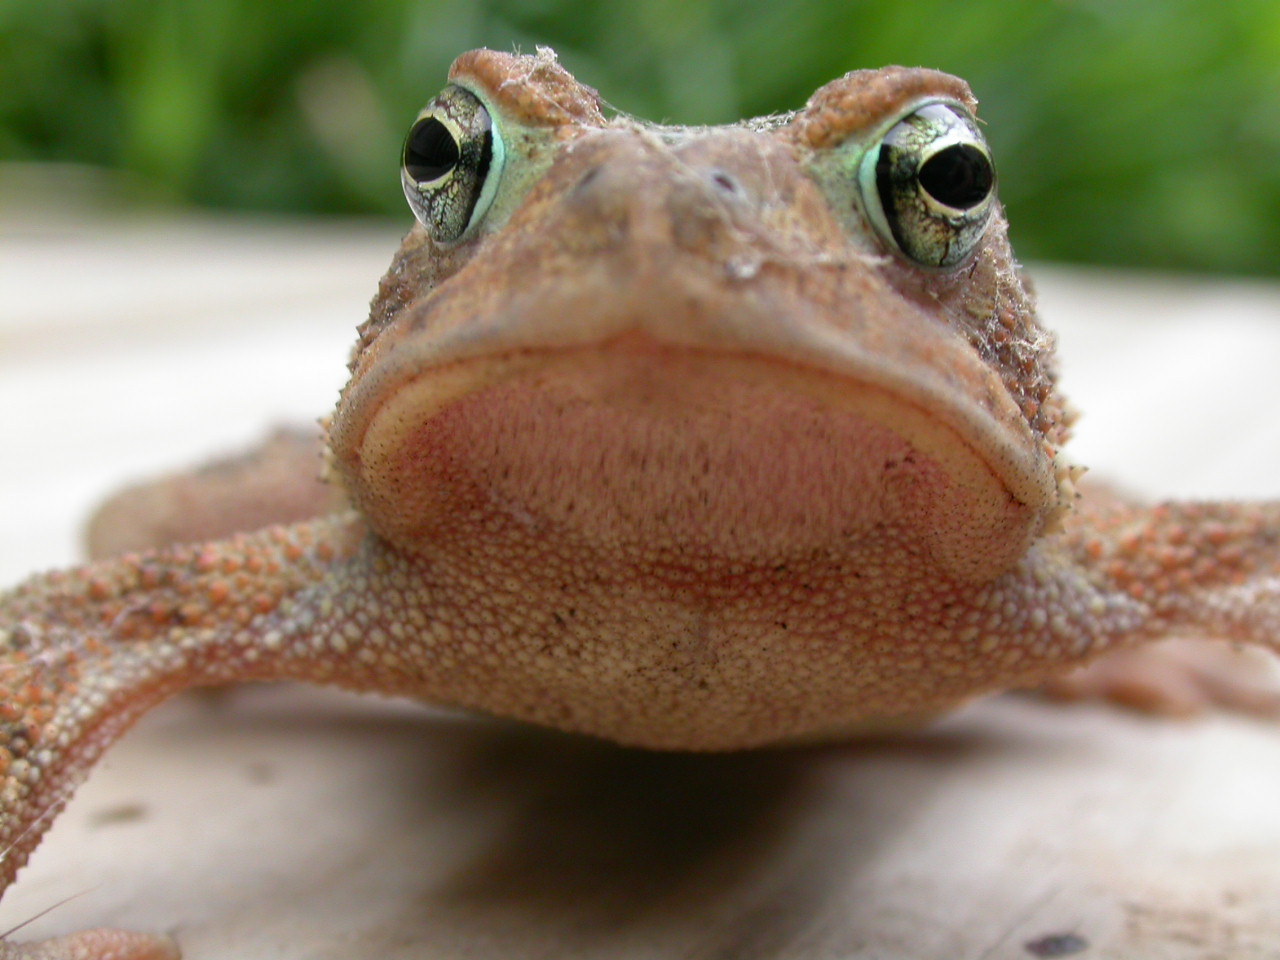 Frog face photo